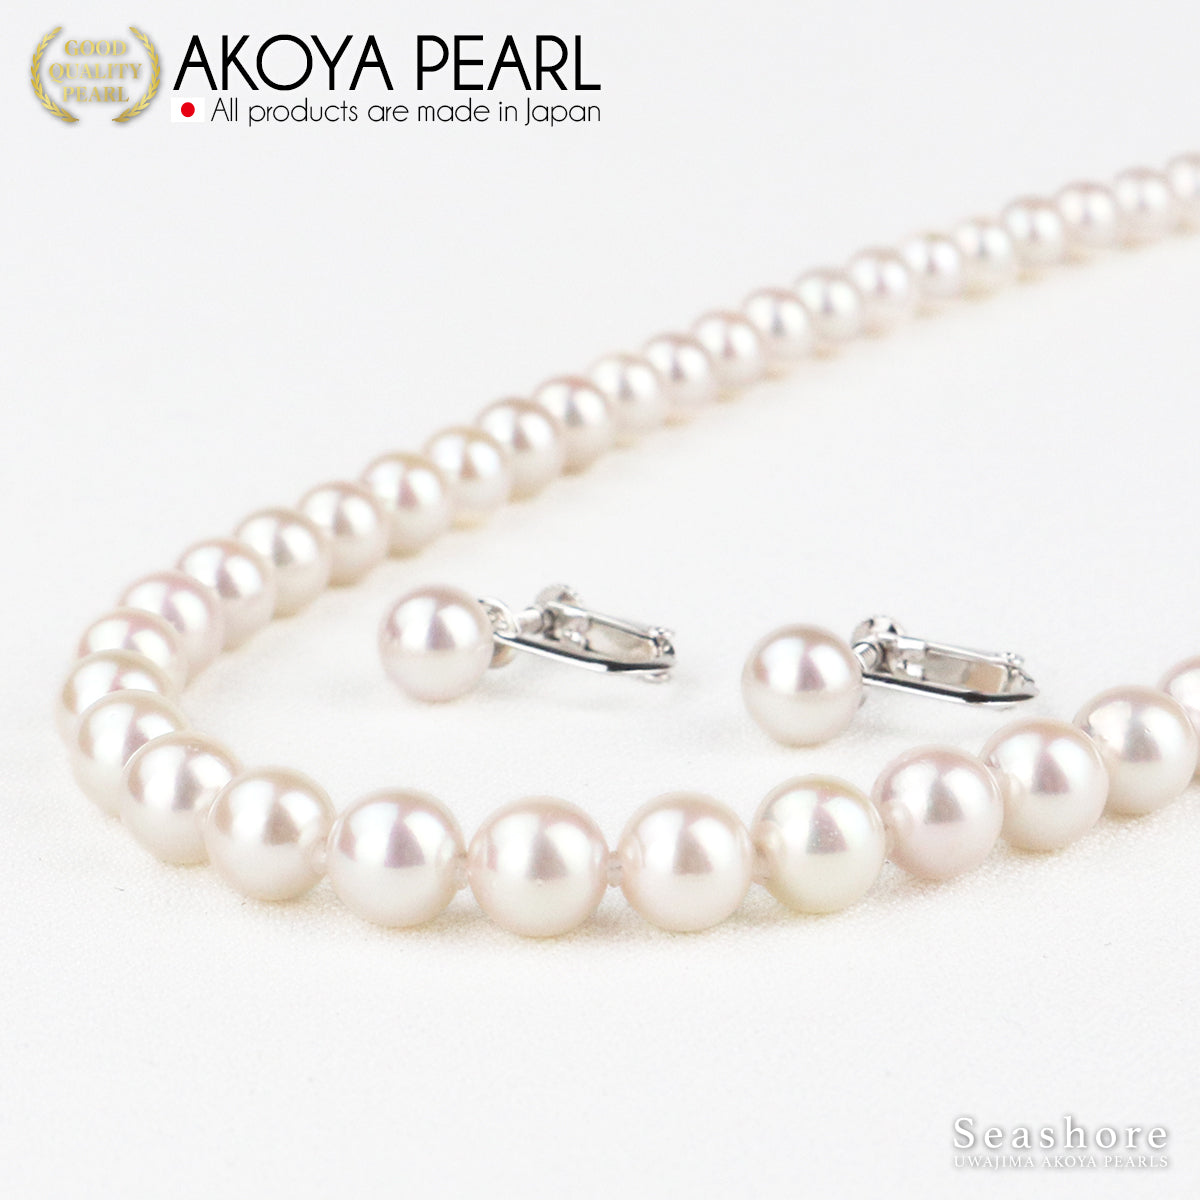 Hanadama Pearl Formal Necklace Set of 2 [7.0-7.5mm] (Earrings Included) Formal Set with Certificate of Authenticity and Storage Case for Ceremonial Occasions